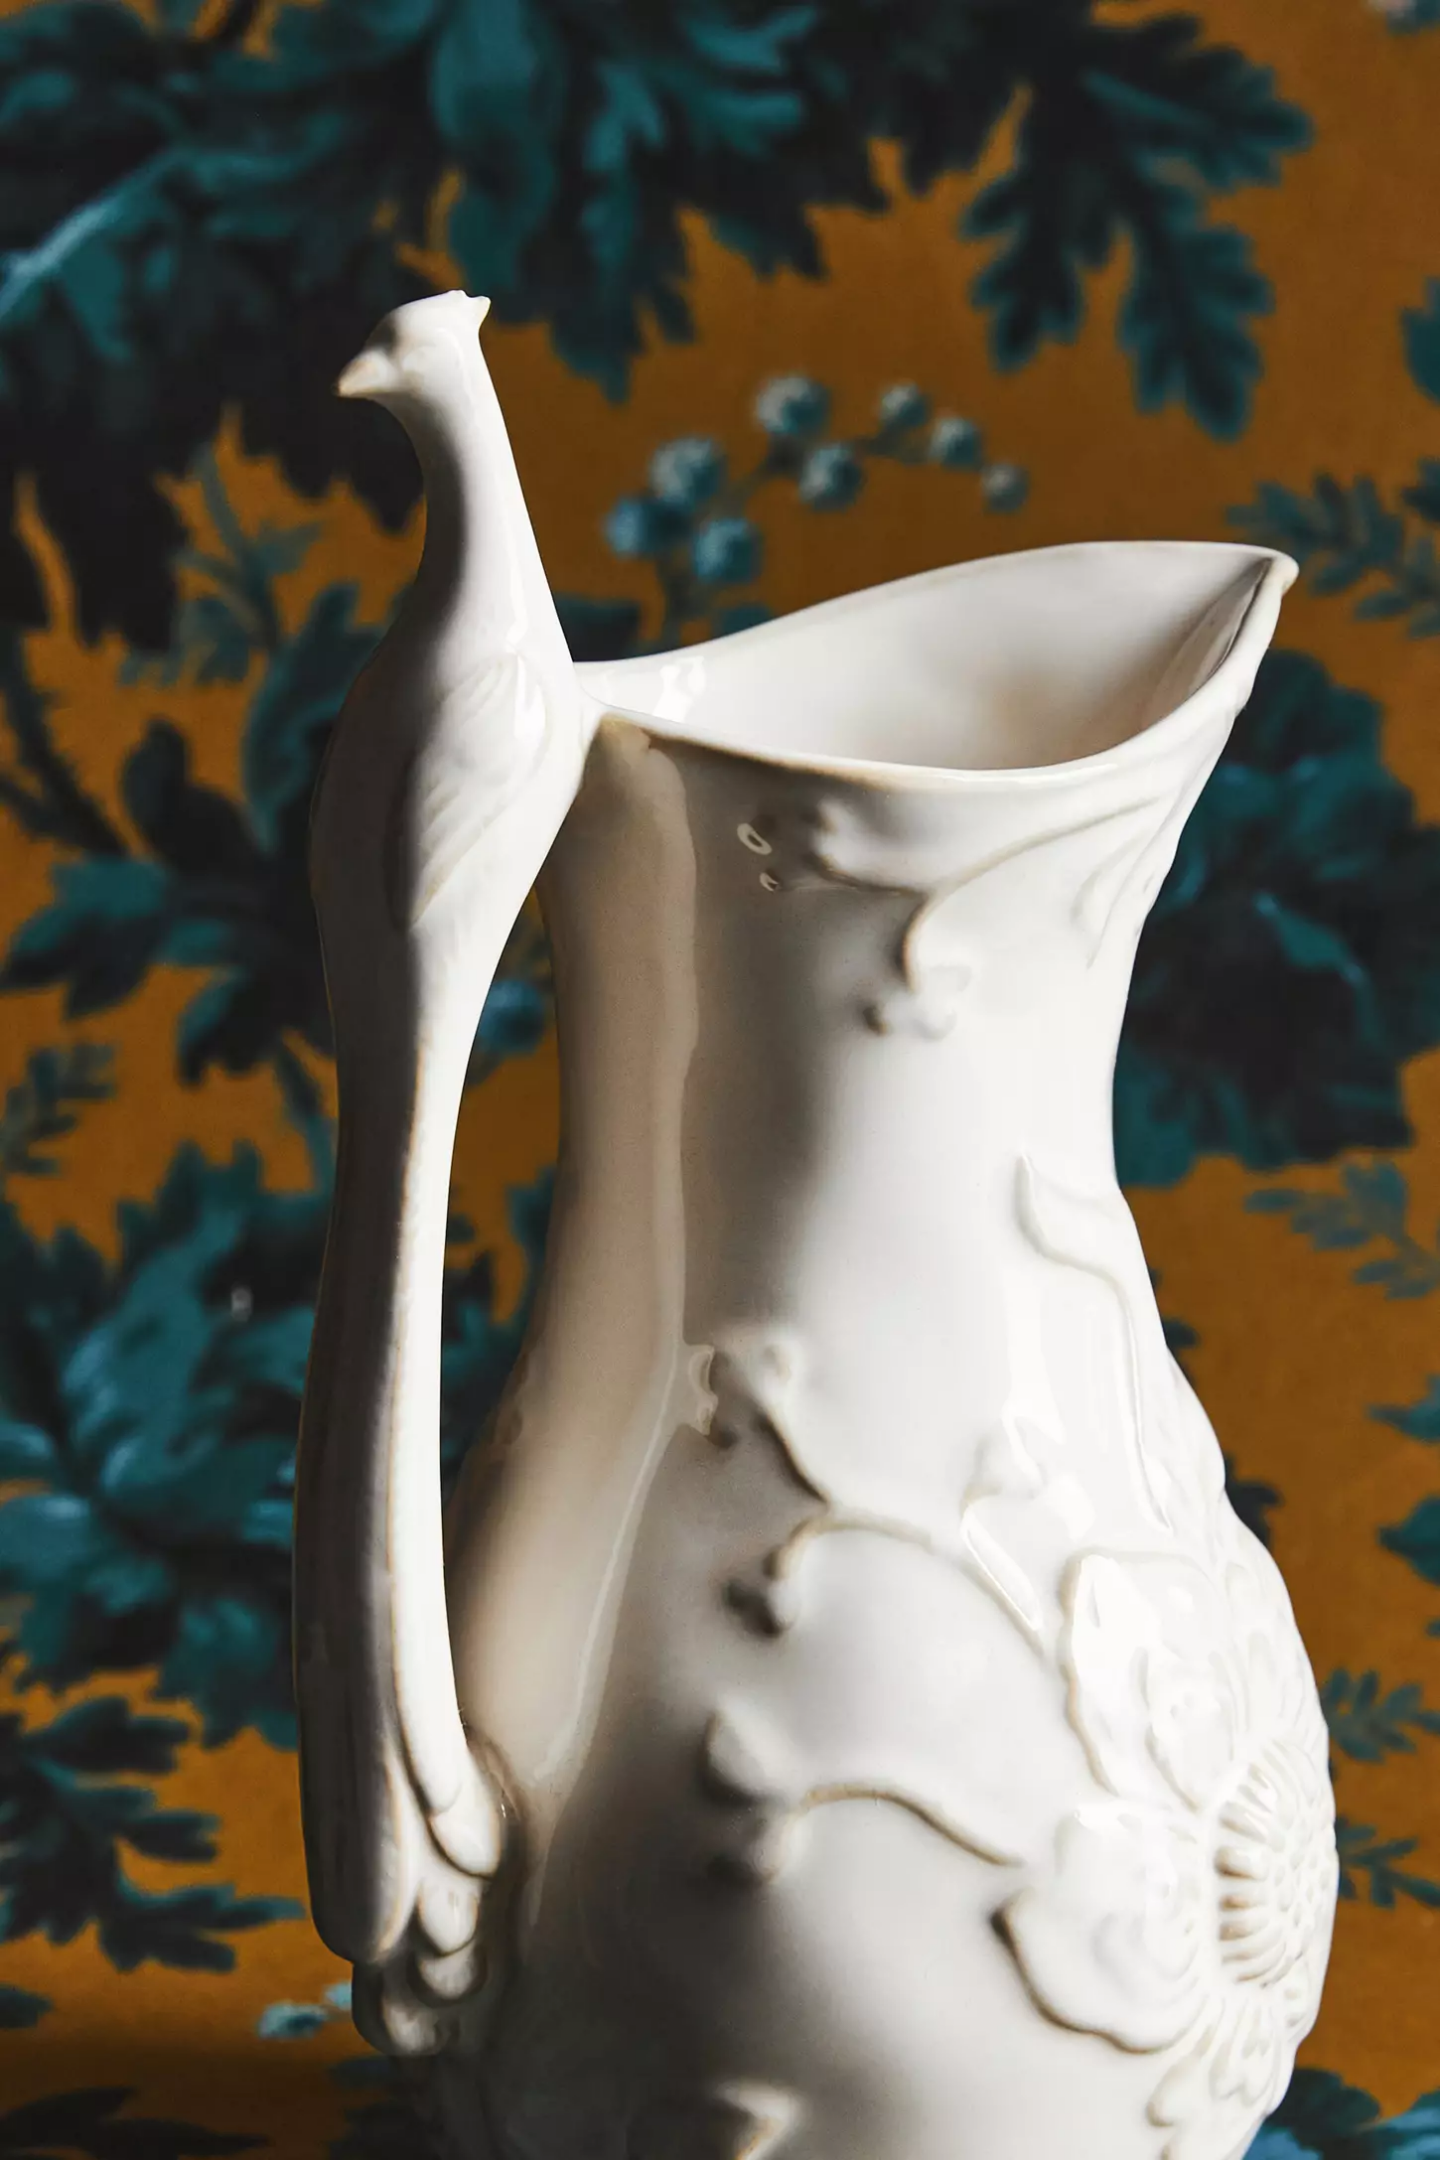 House of Hackney Plume Pitcher, Anthropologie